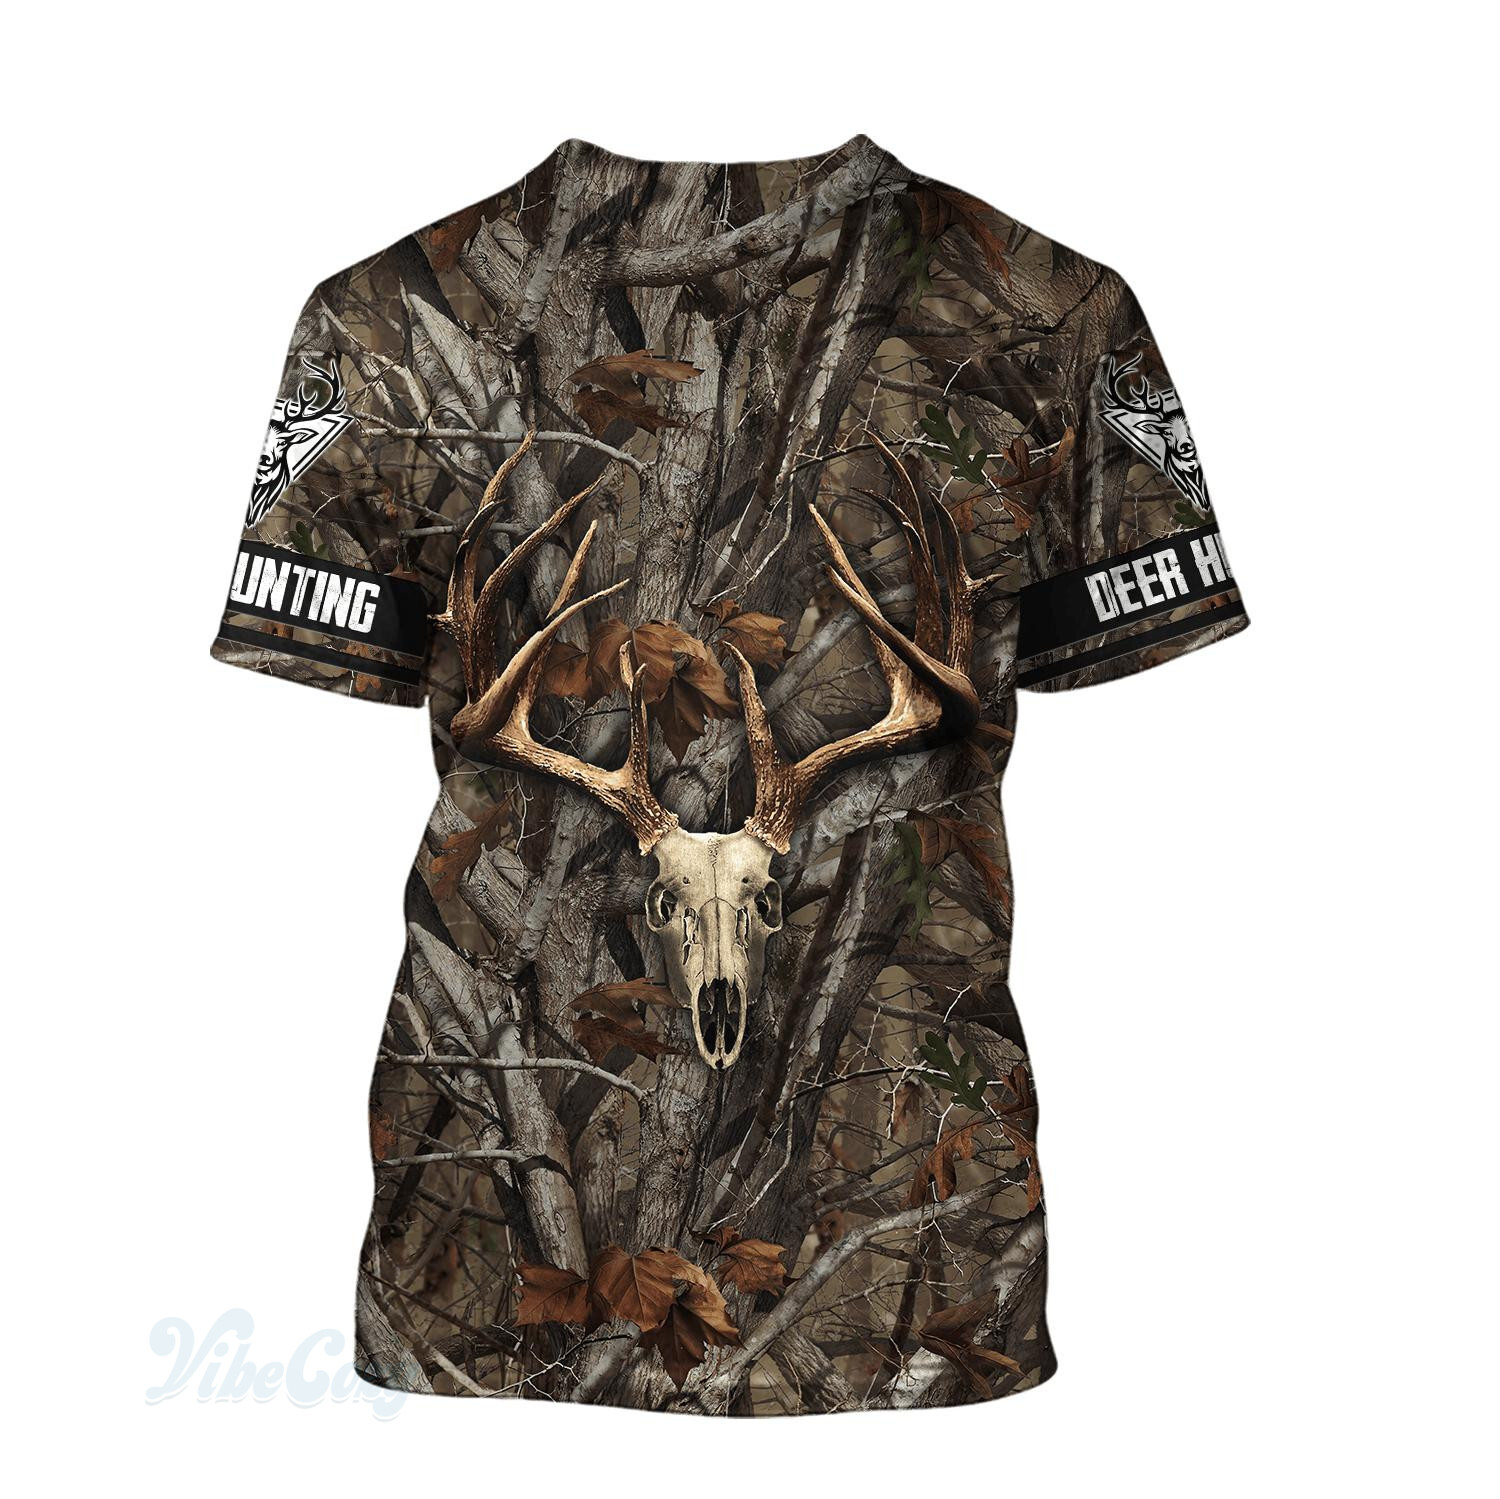 Awesome Deer Hunting Hoodie 3D All Over Printed Shirts For Men AM082054-LAM